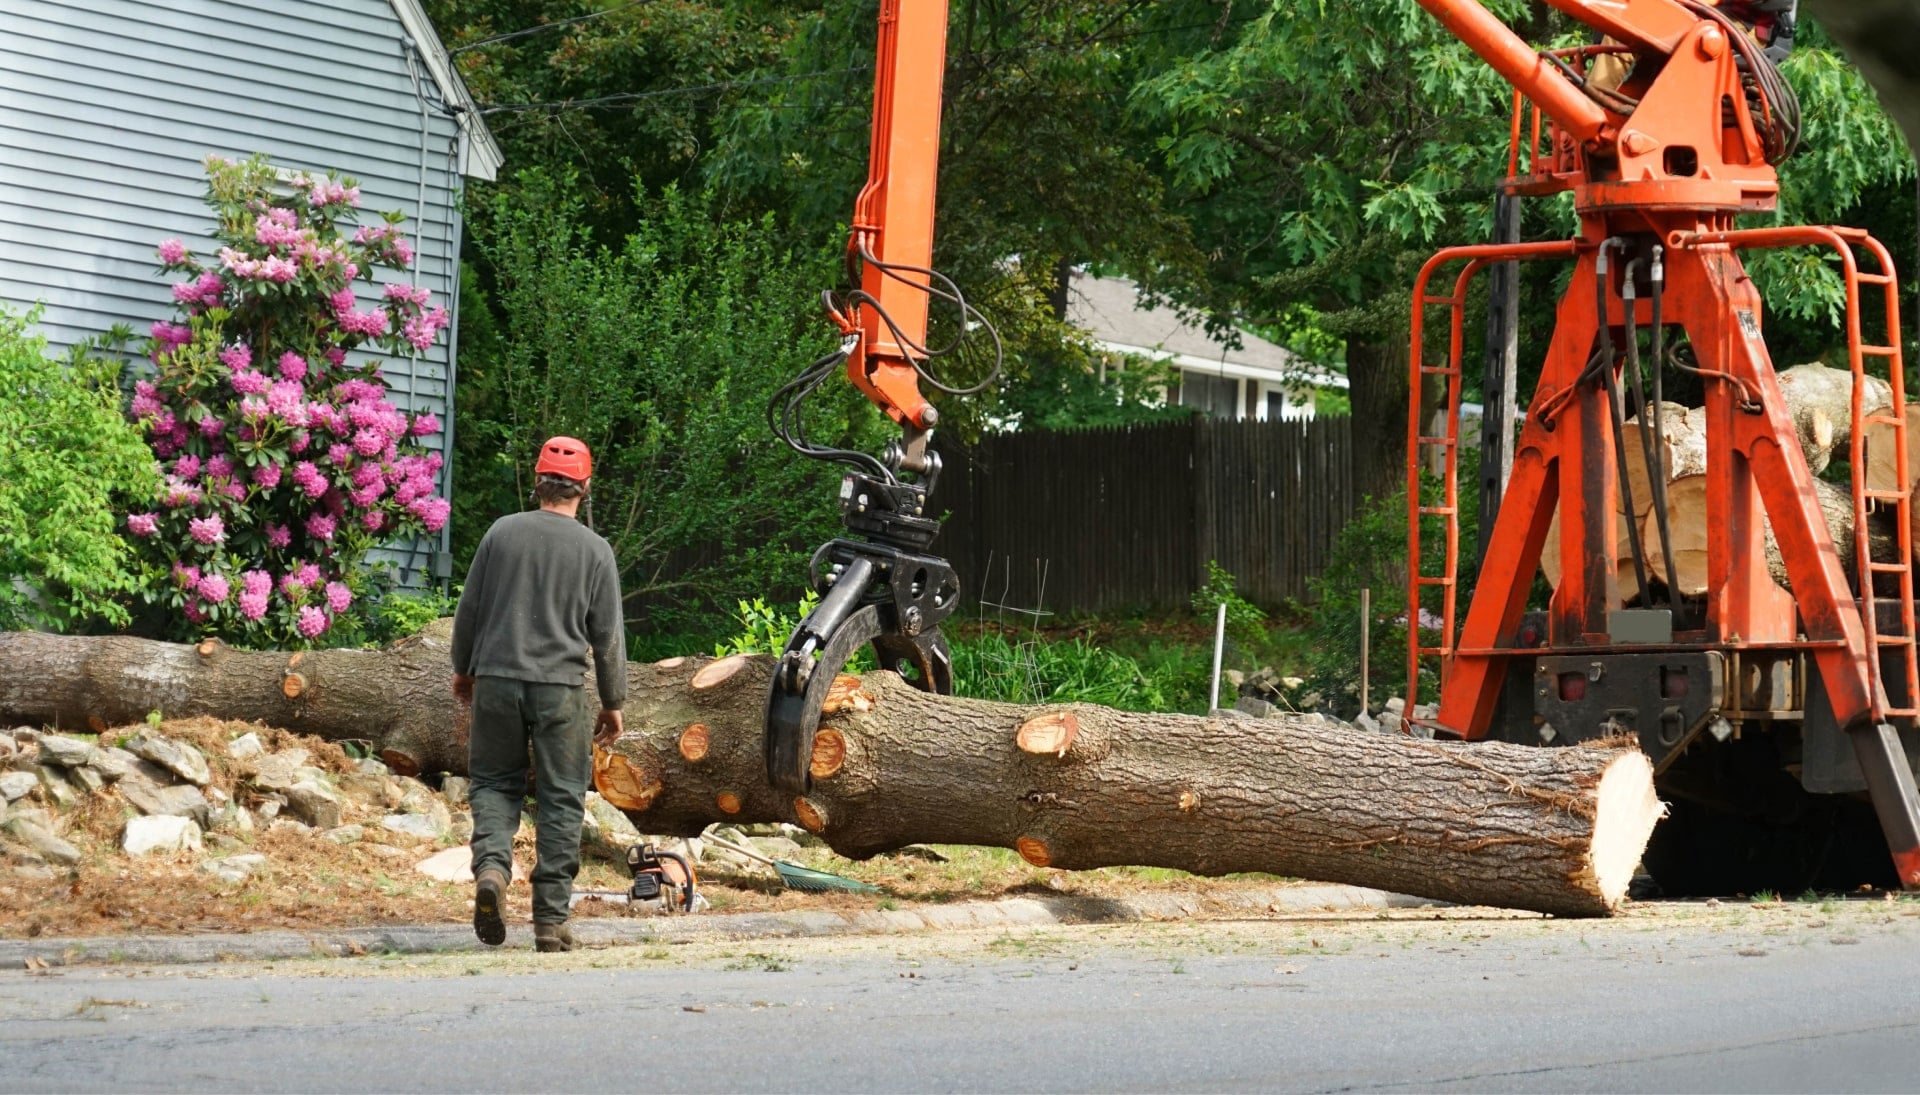 Local partner for Tree removal services in Iowa City